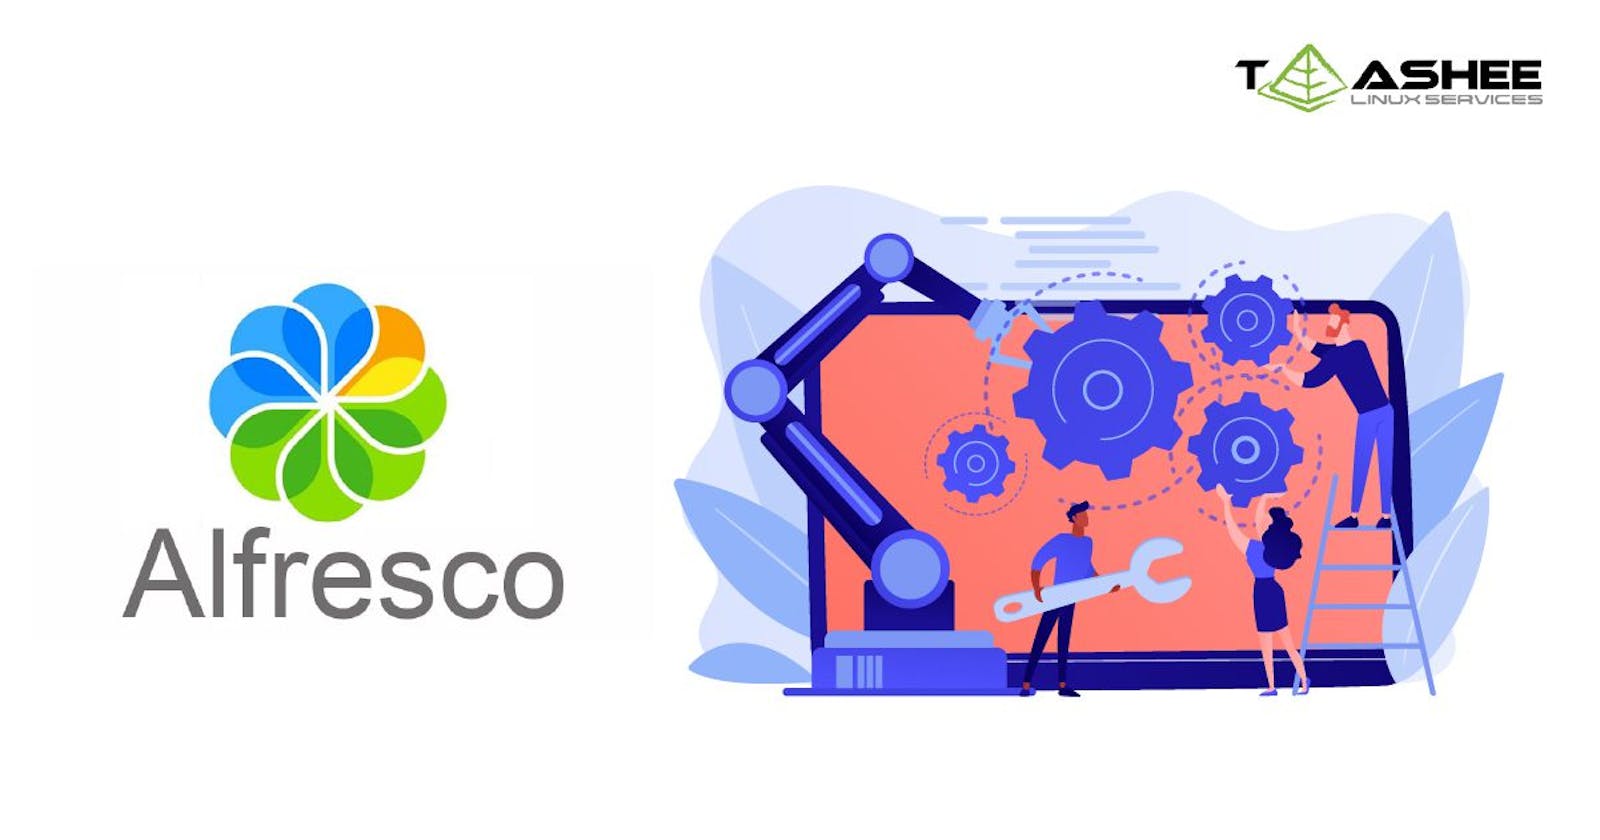 8 Cutting-Edge Tips for Mastering Digital Asset Management with Alfresco